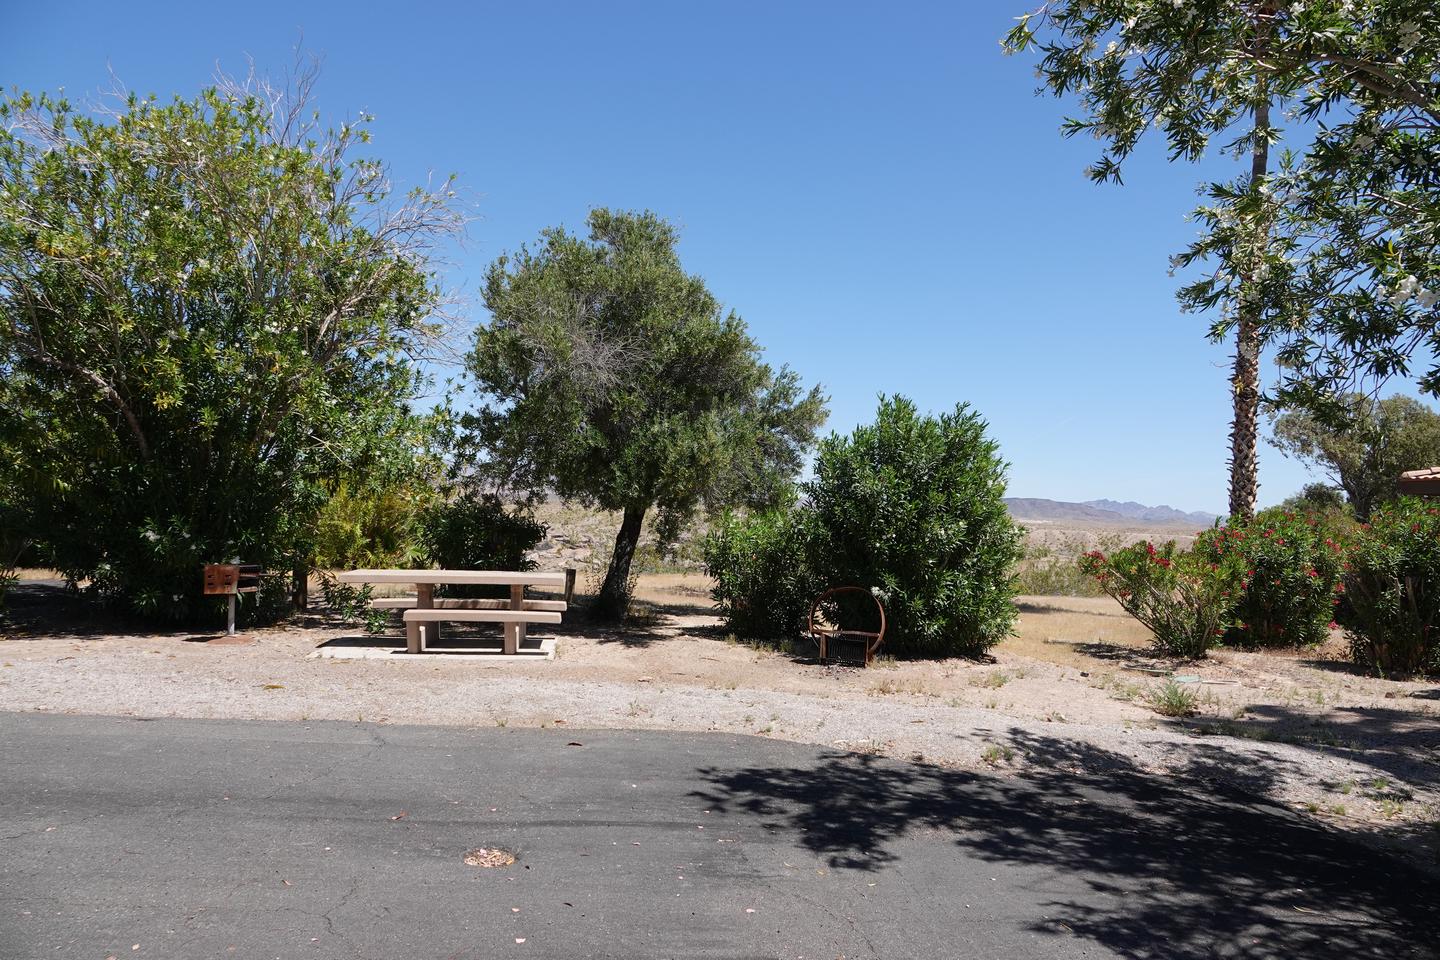 LVB3802Las Vegas Bay Campground Site 38
This is an accessible site. You must have an accessible plate or placard to reserve.